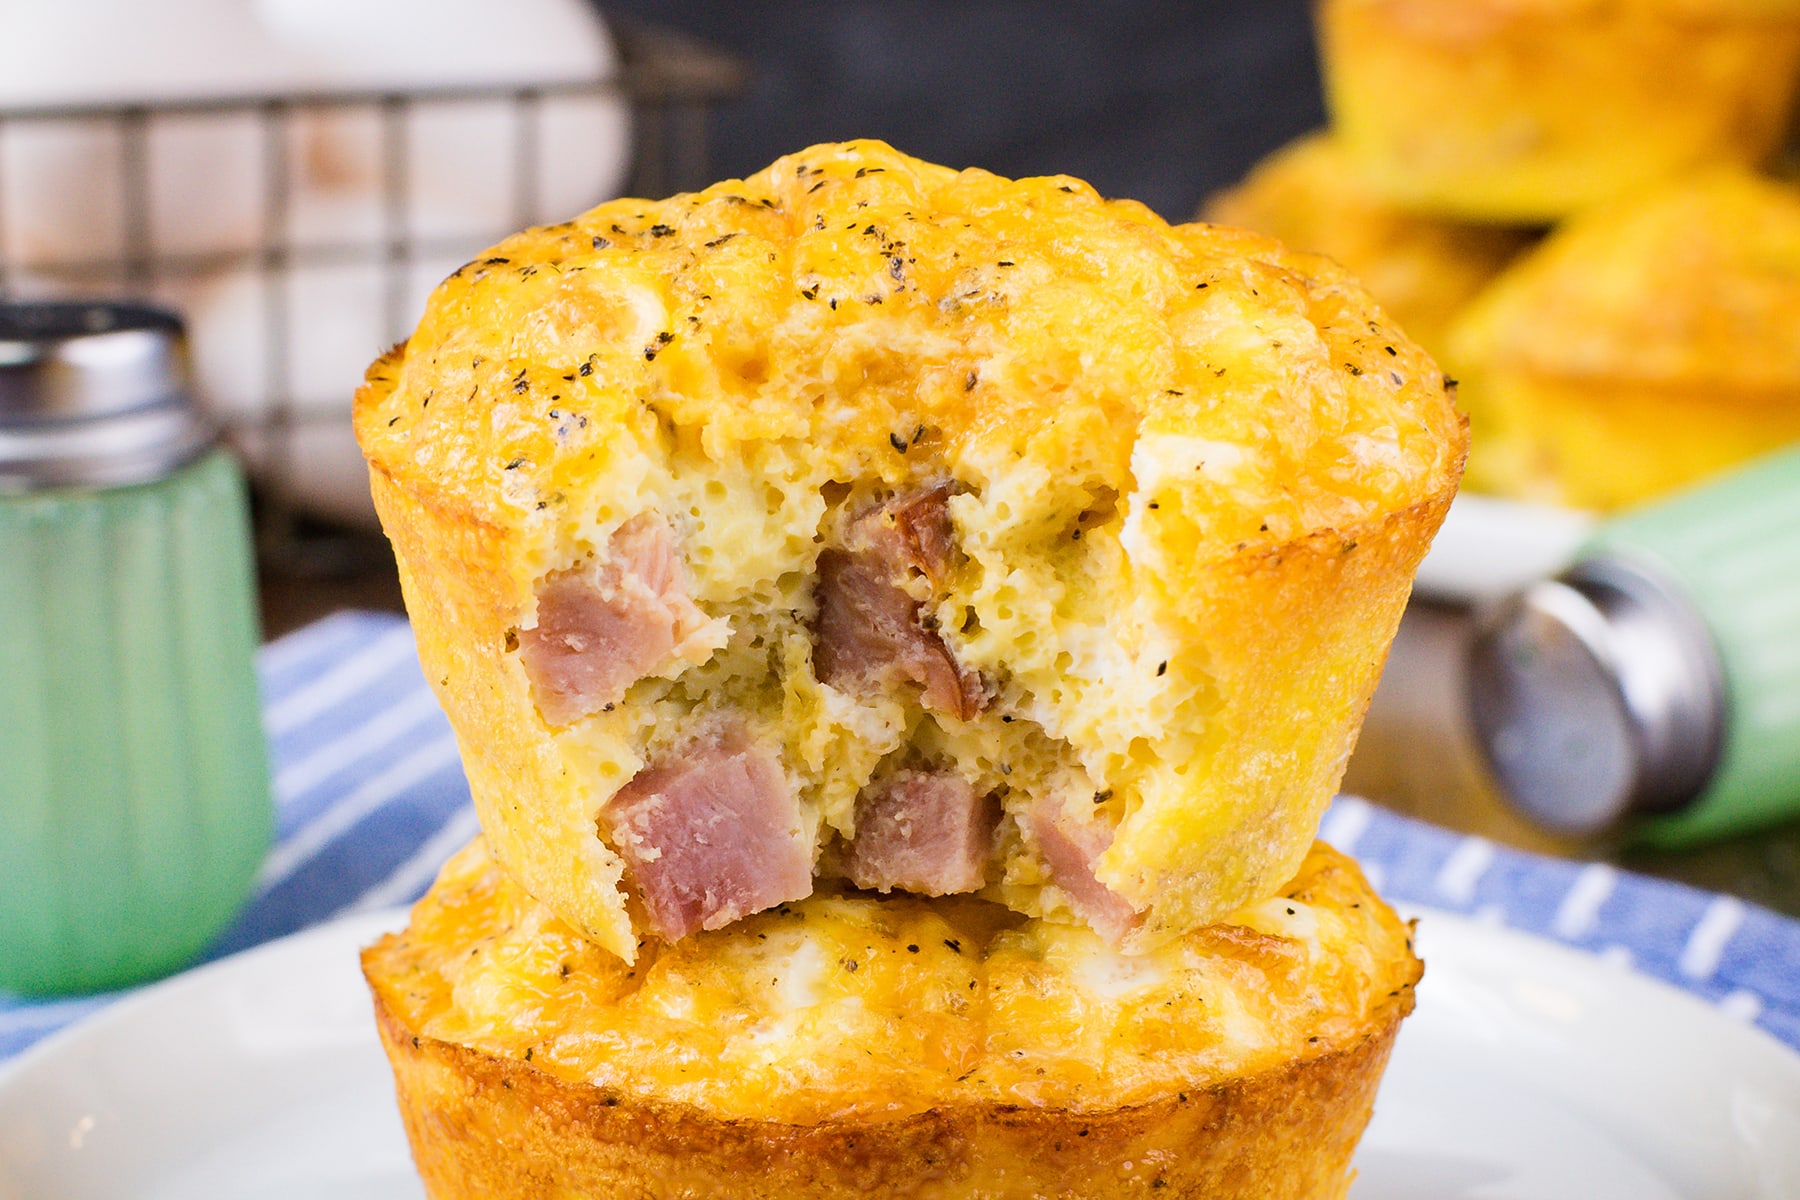 https://food-fanatic-res.cloudinary.com/iu/s--LngEMUUf--/f_auto,q_auto/v1546640502/baked-ham-and-cheese-egg-muffins-photo